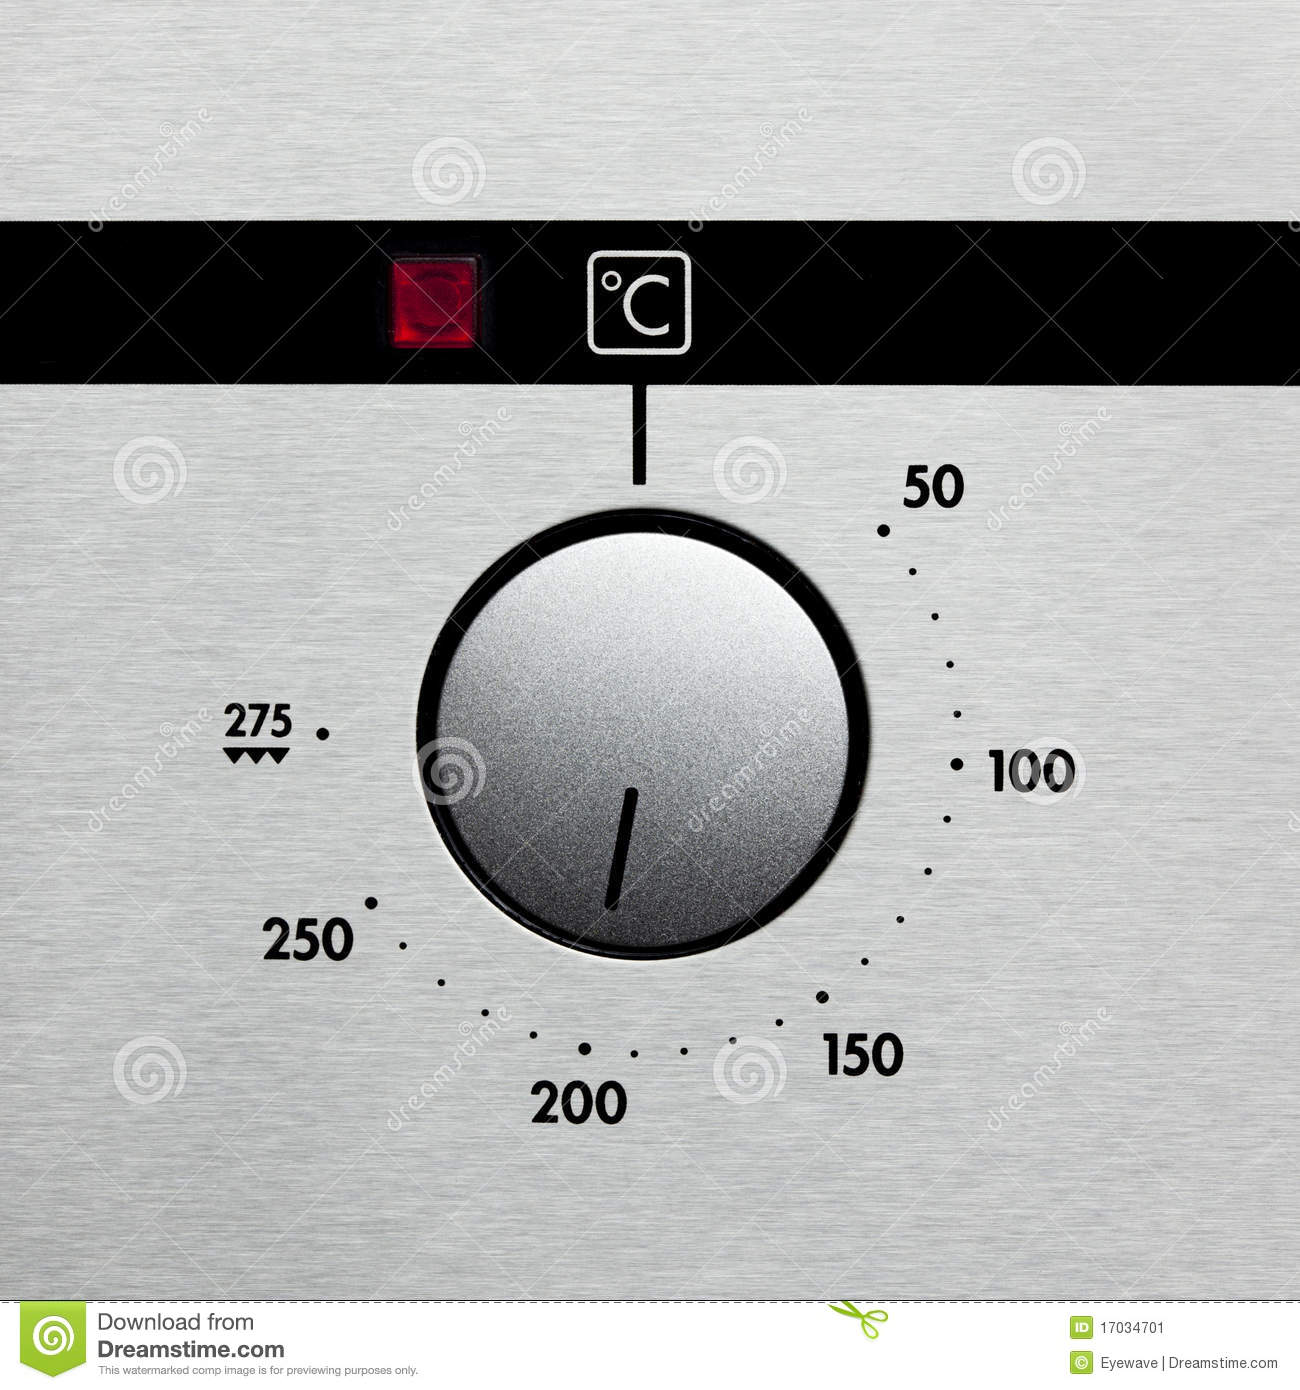 Oven Dial Stock Image   Image  17034701